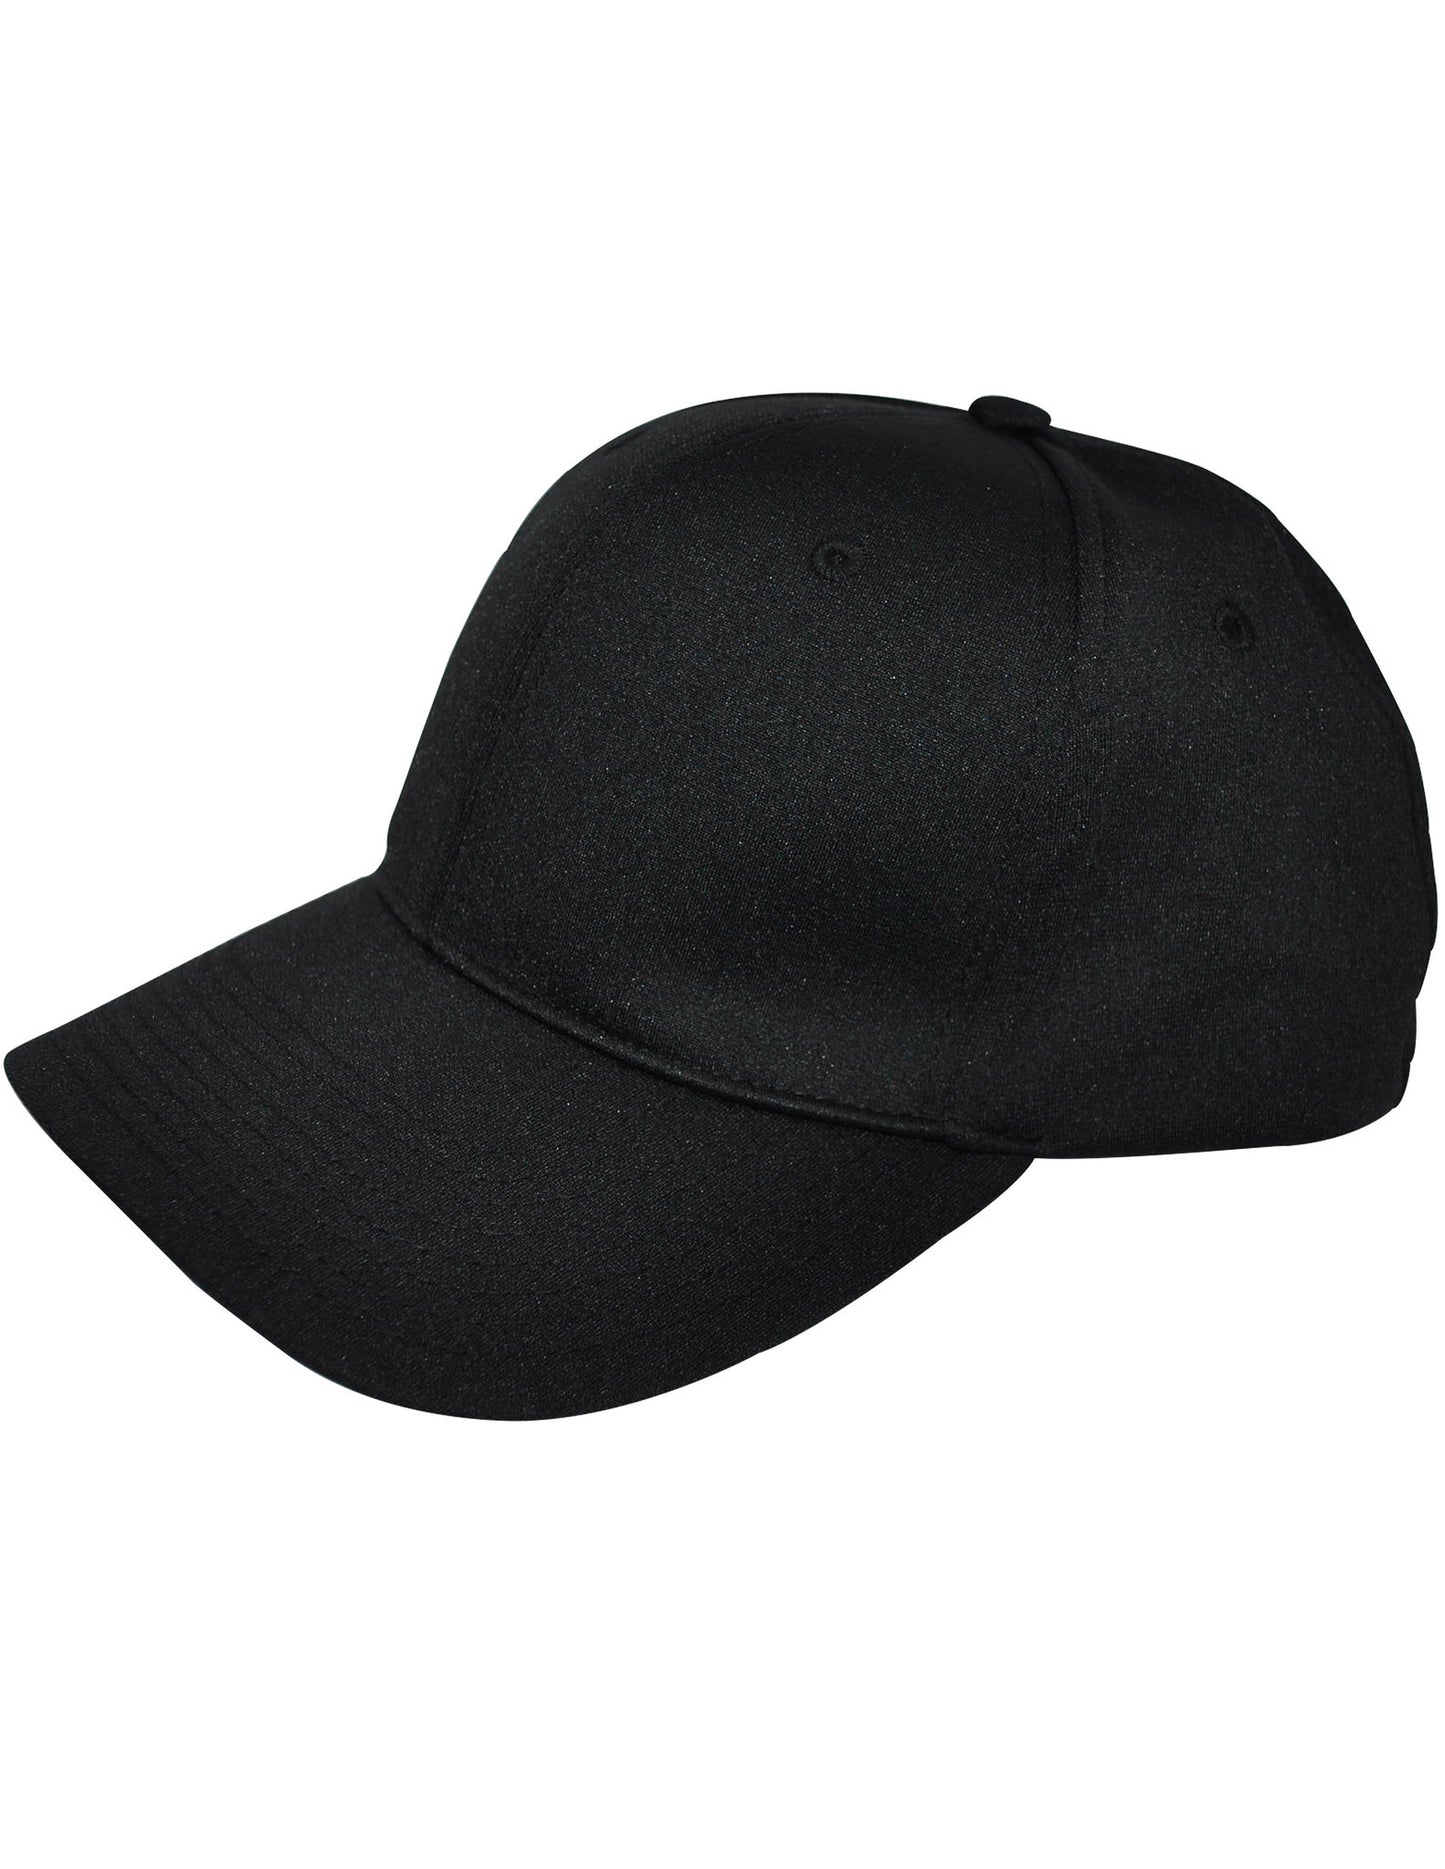 HT308 - Smitty - 8 Stitch Flex Fit Umpire (BASE) Hat - Available in Black and Navy